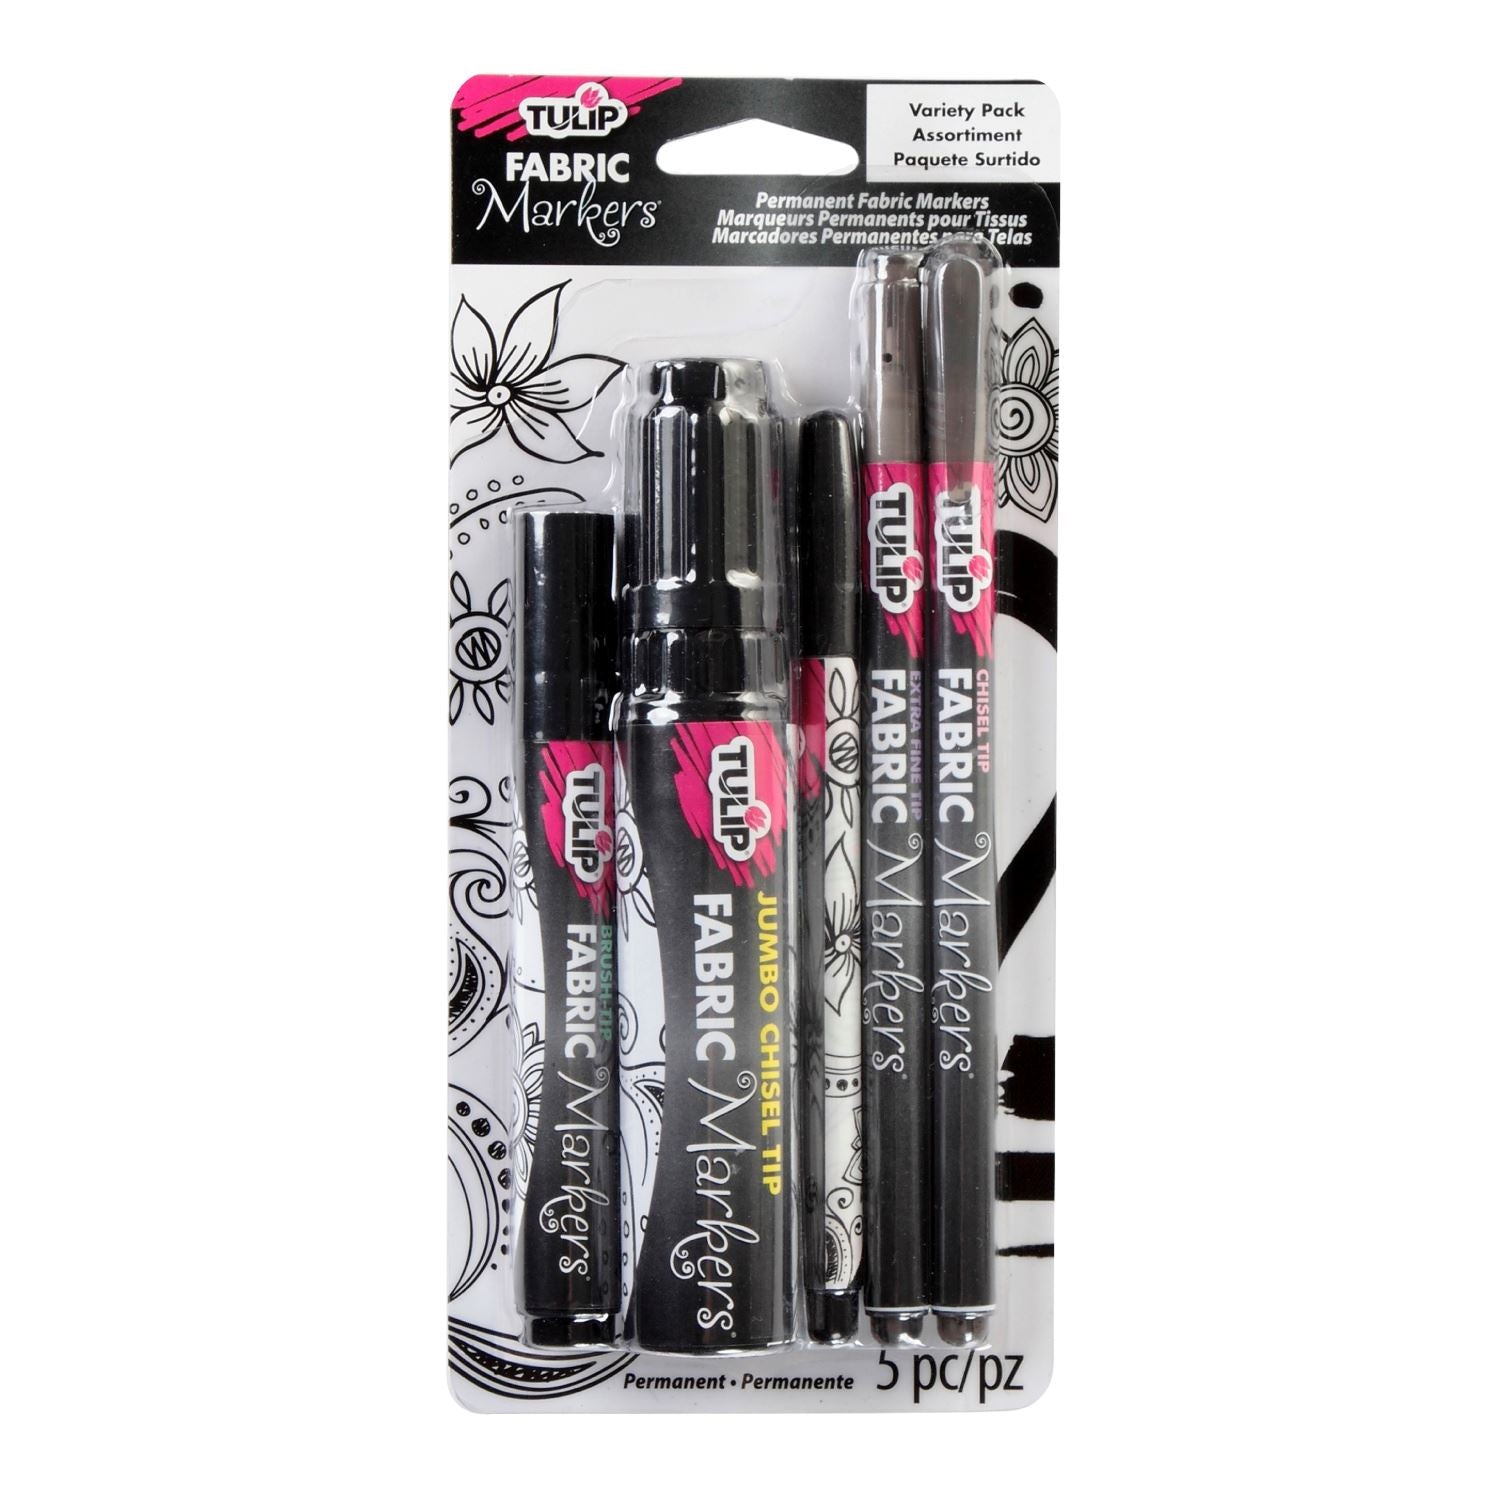 Tulip Fabric Markers Black Variety 5 Pack - 1